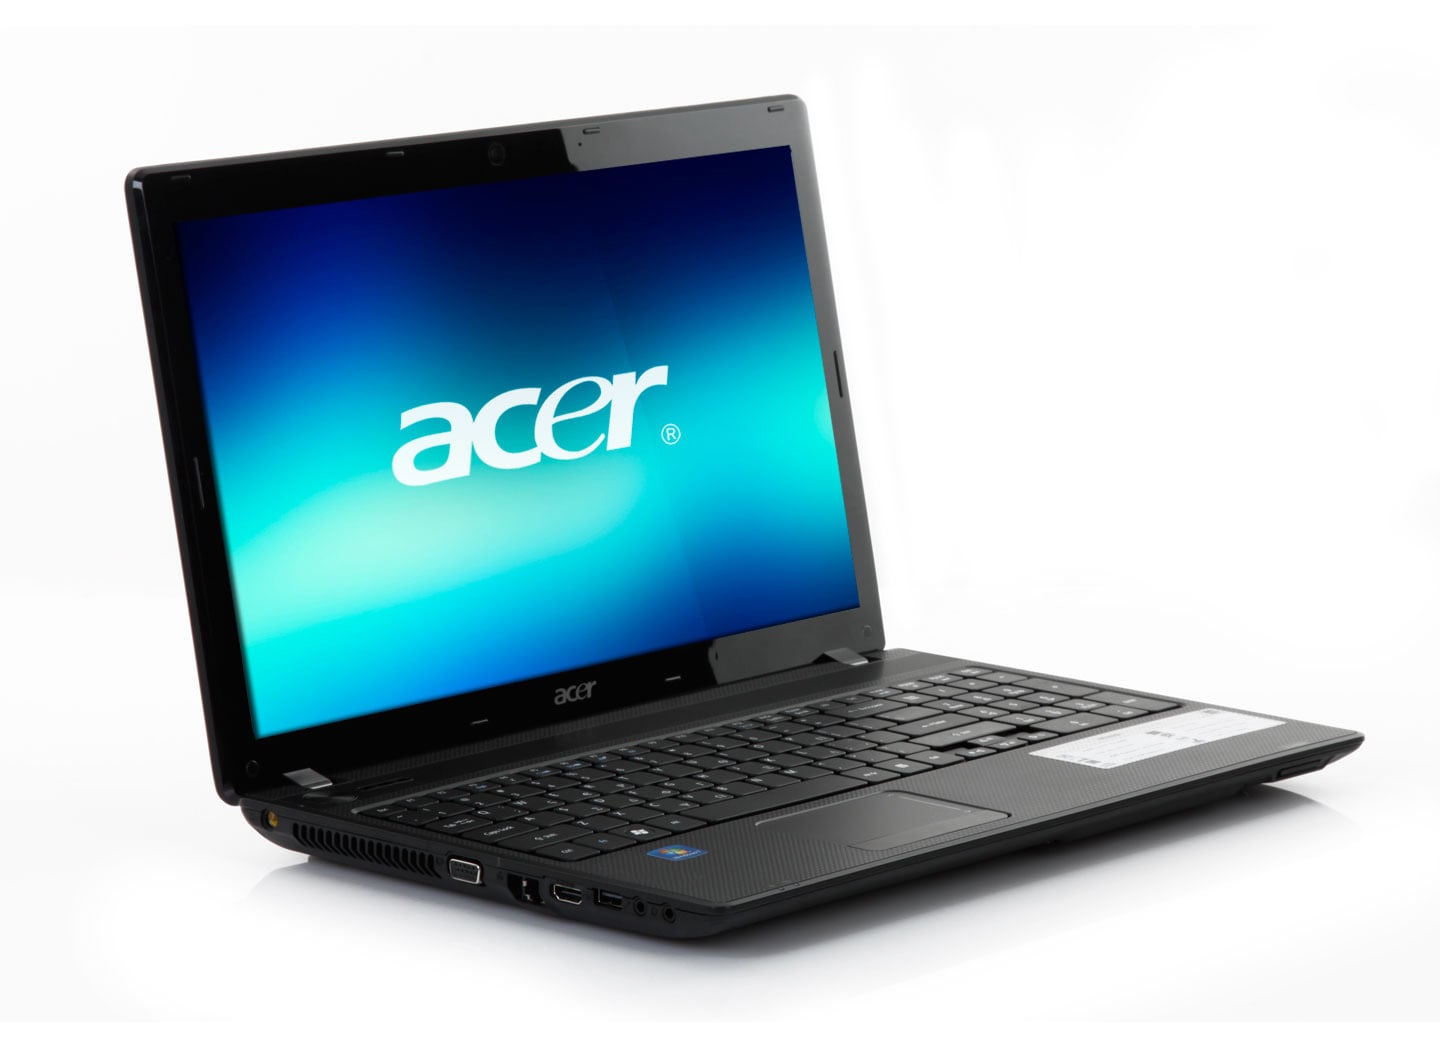 acer aspire 5742g bluetooth drivers free download